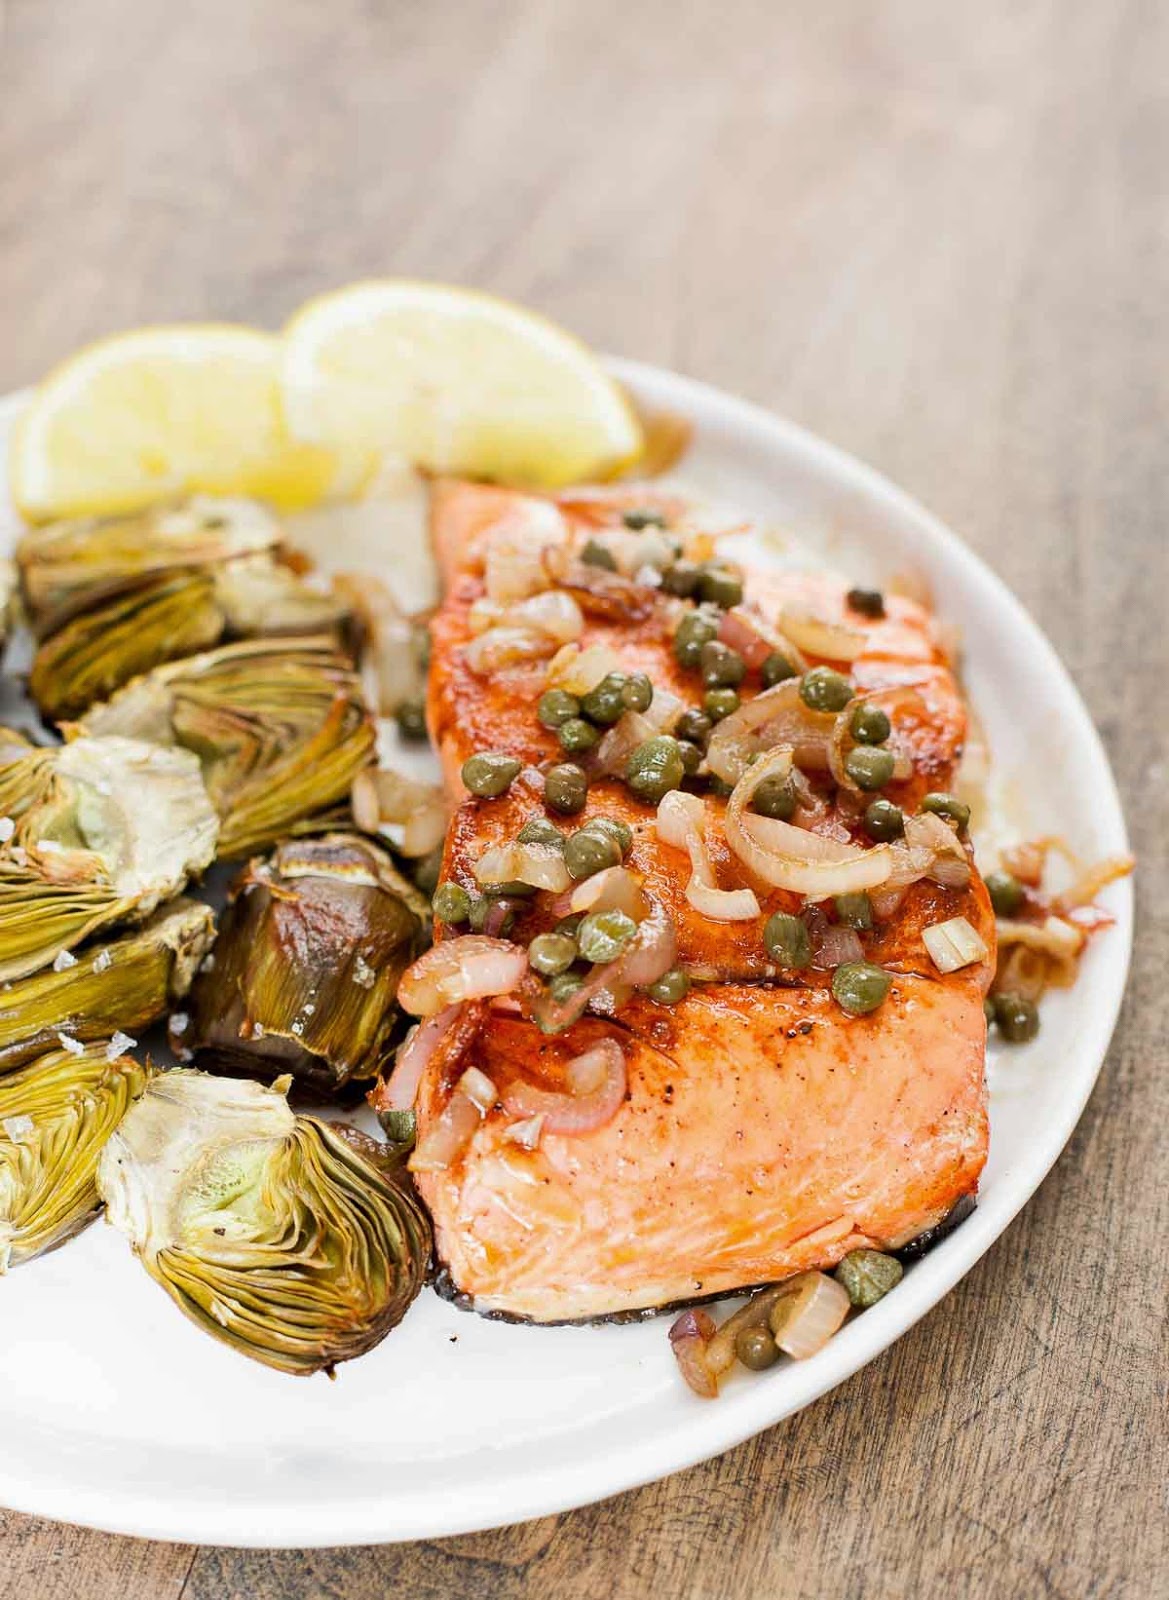 Pan-Seared Salmon with Capers and Baby Artichokes | acalculatedwhisk.com A delicious paleo meal that takes less than 30 minutes to make!